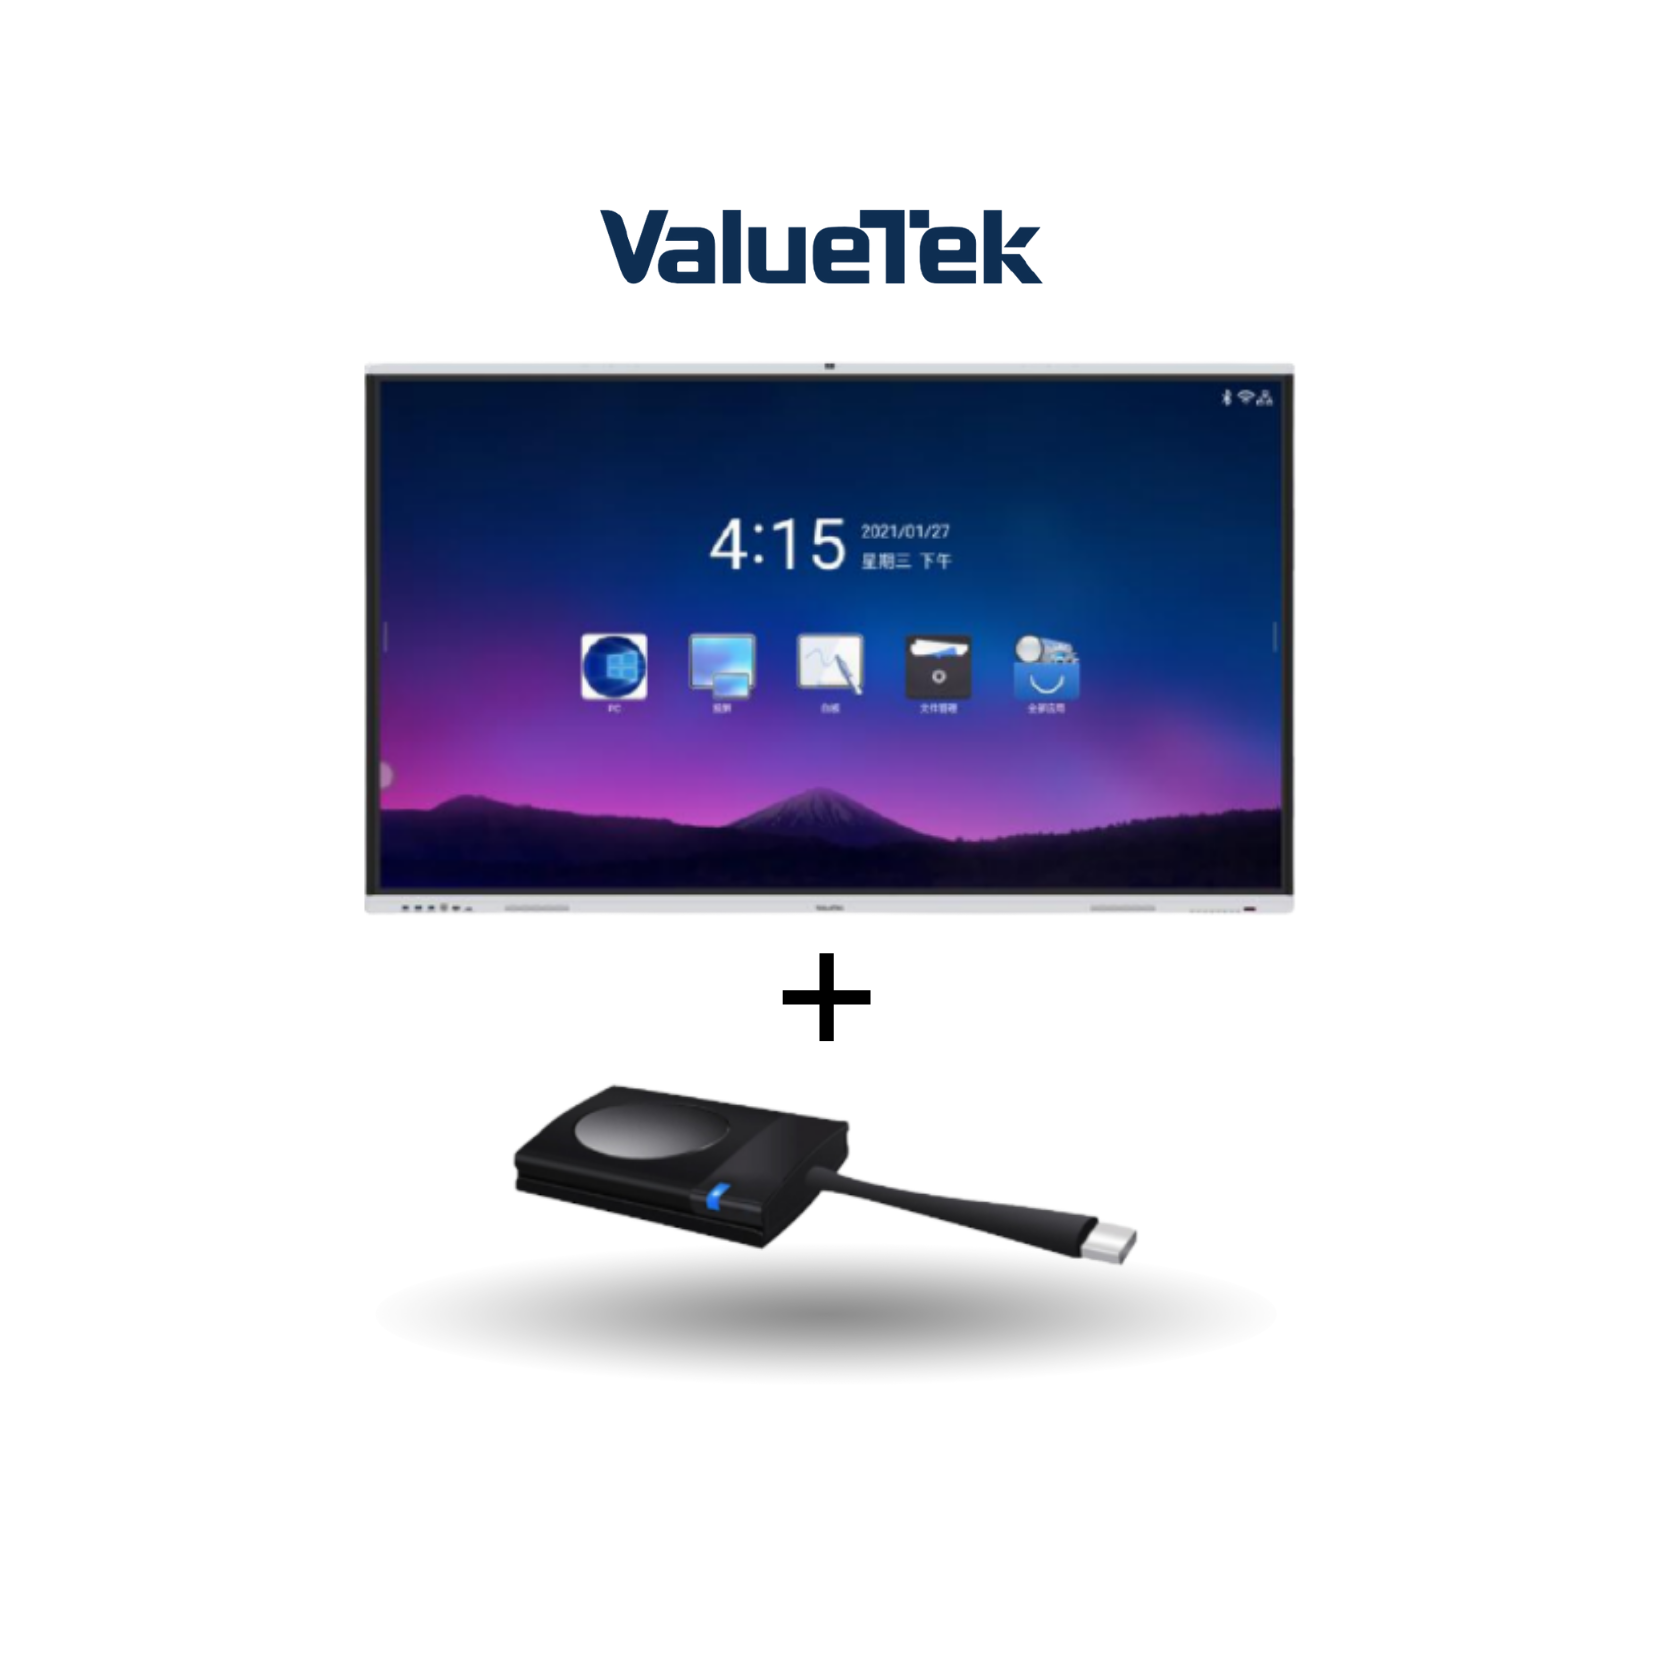 ValueTek 65" Touch Screen Smart Monitor TV |Dual OS Android & Window |4K Ultra-HD Resolution |Built-in FHD Camera & 6 Mic